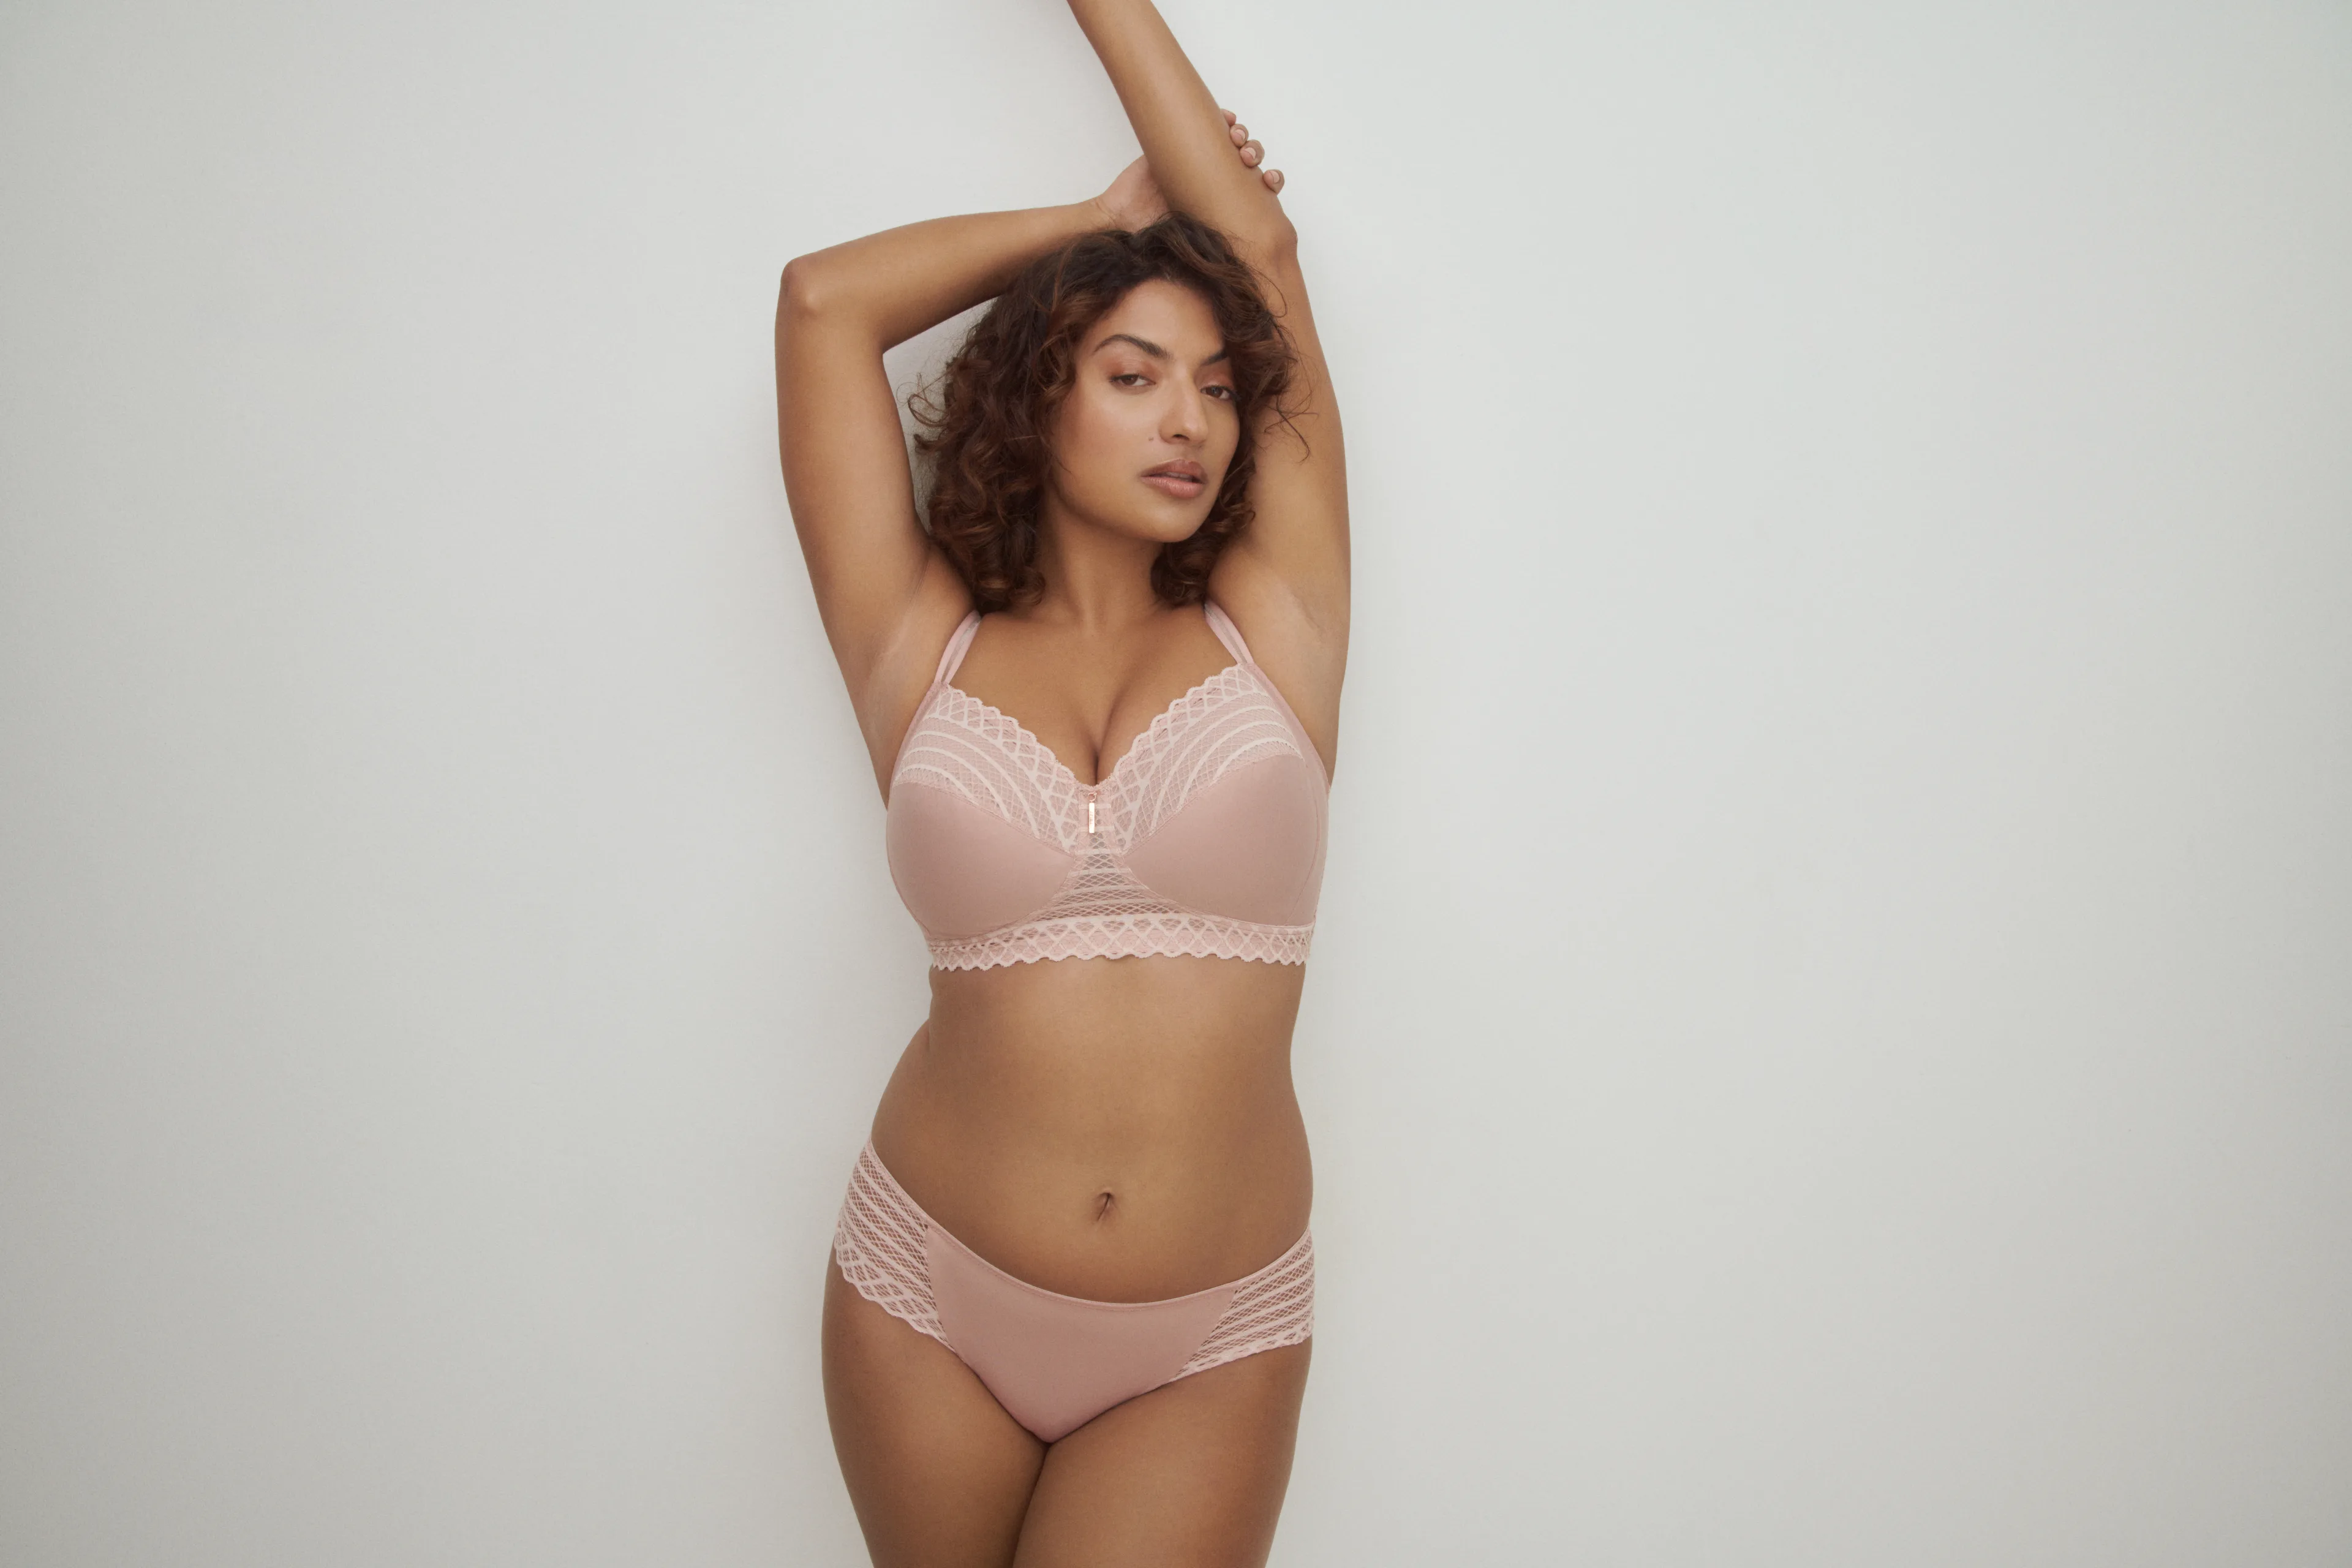 3. Comfy bras without underwire